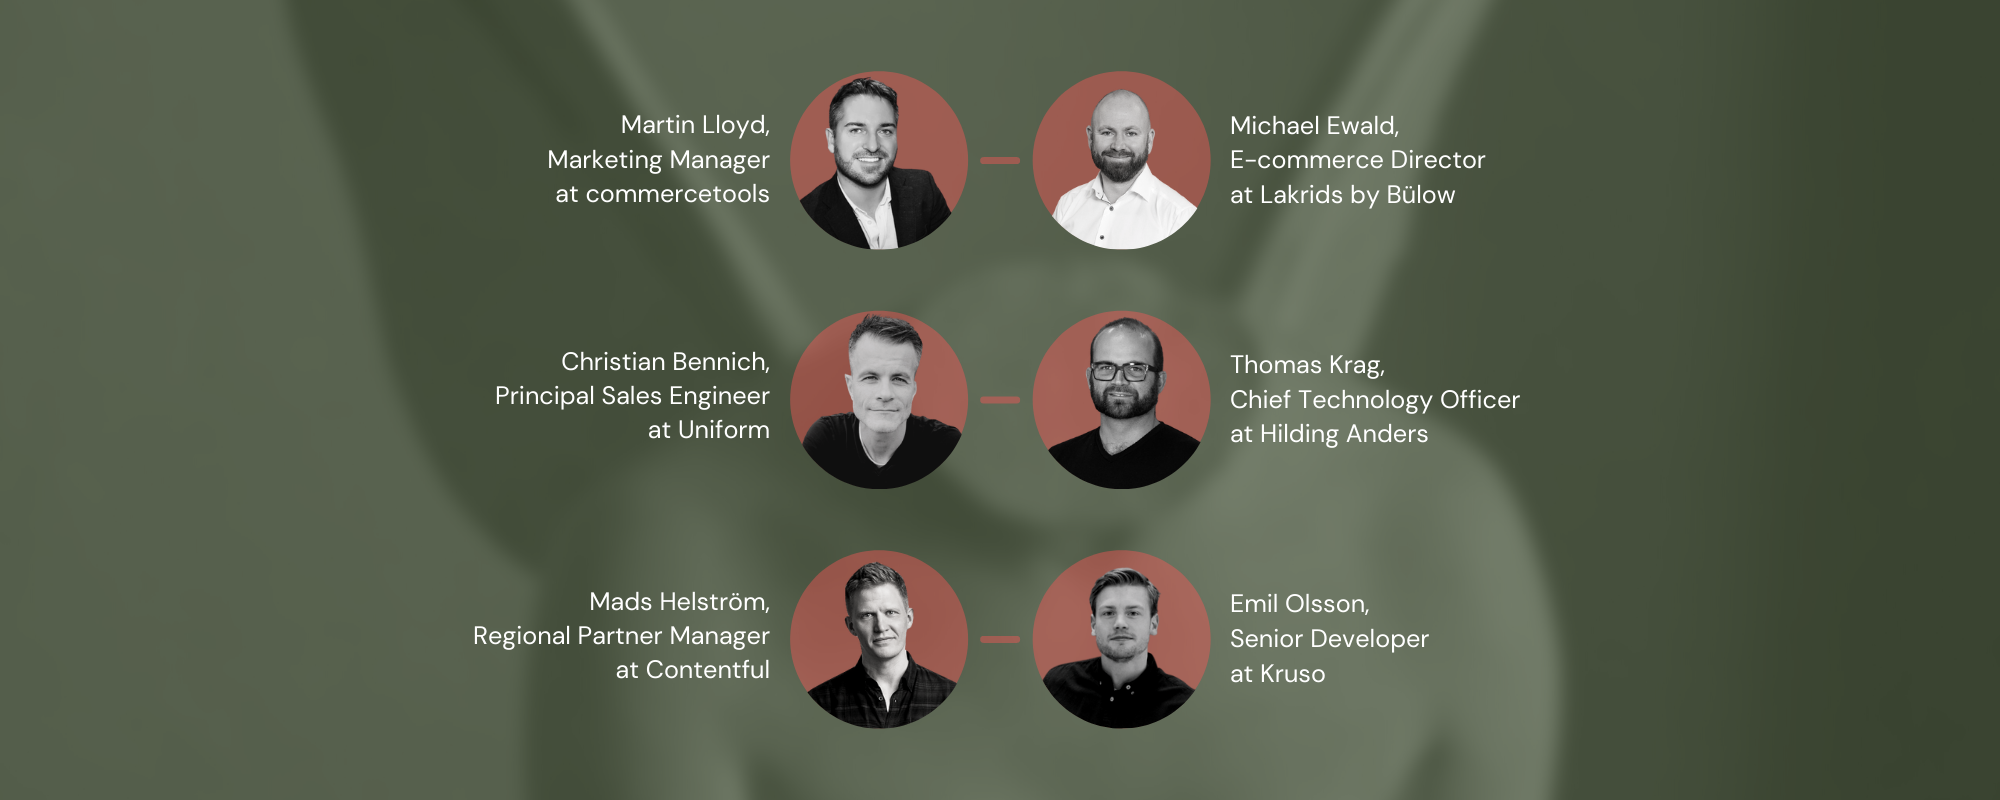 speakers and partners for the event